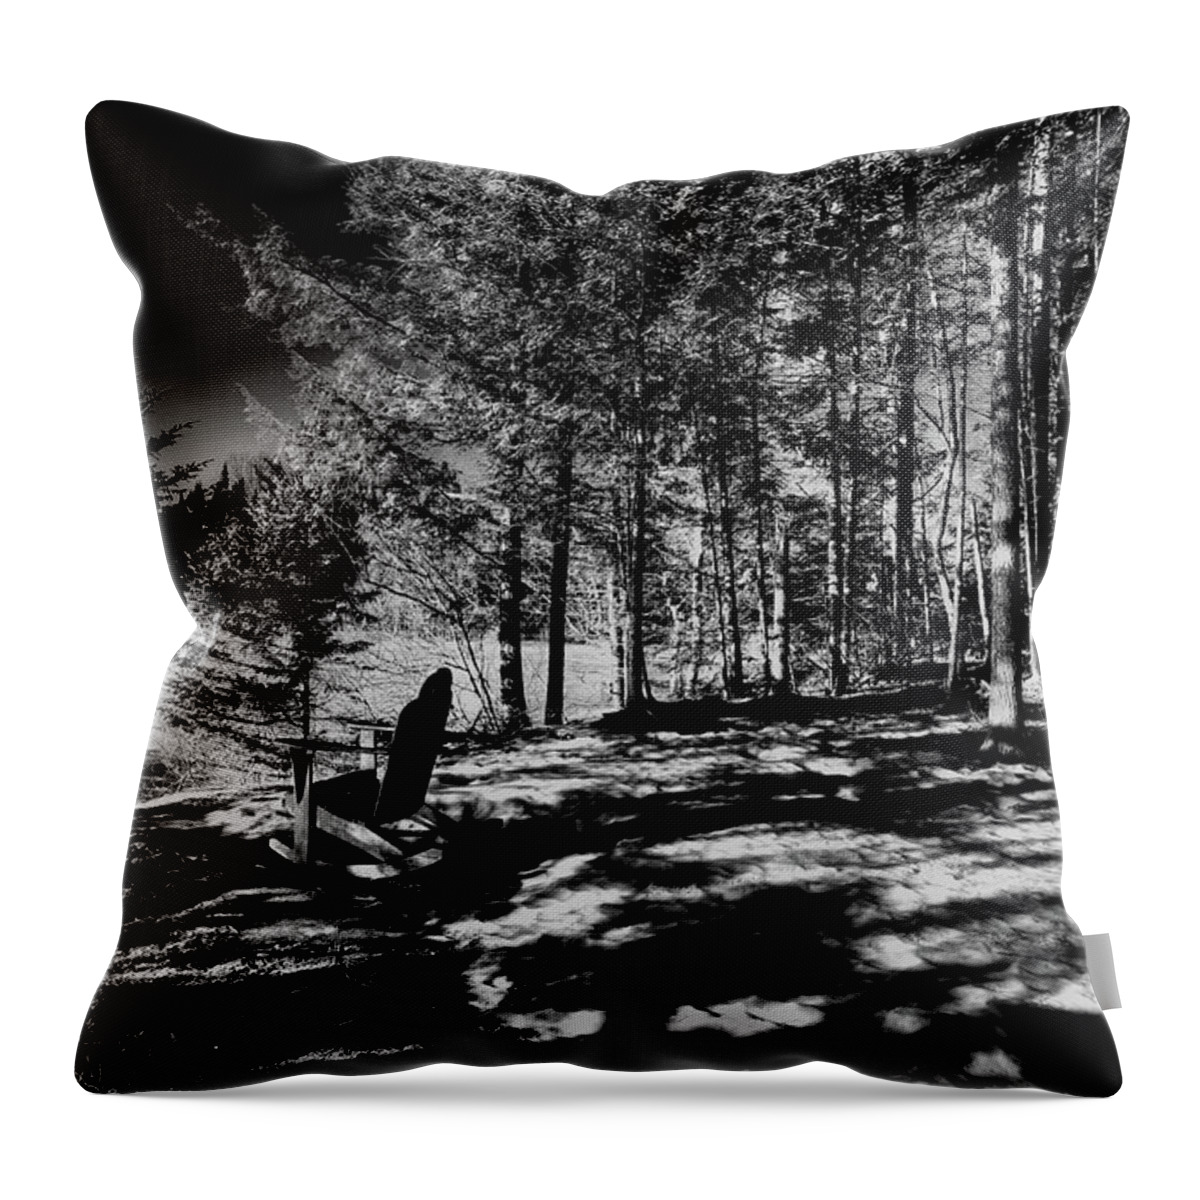 Moose River Shadows Throw Pillow featuring the photograph Moose River Shadows by David Patterson